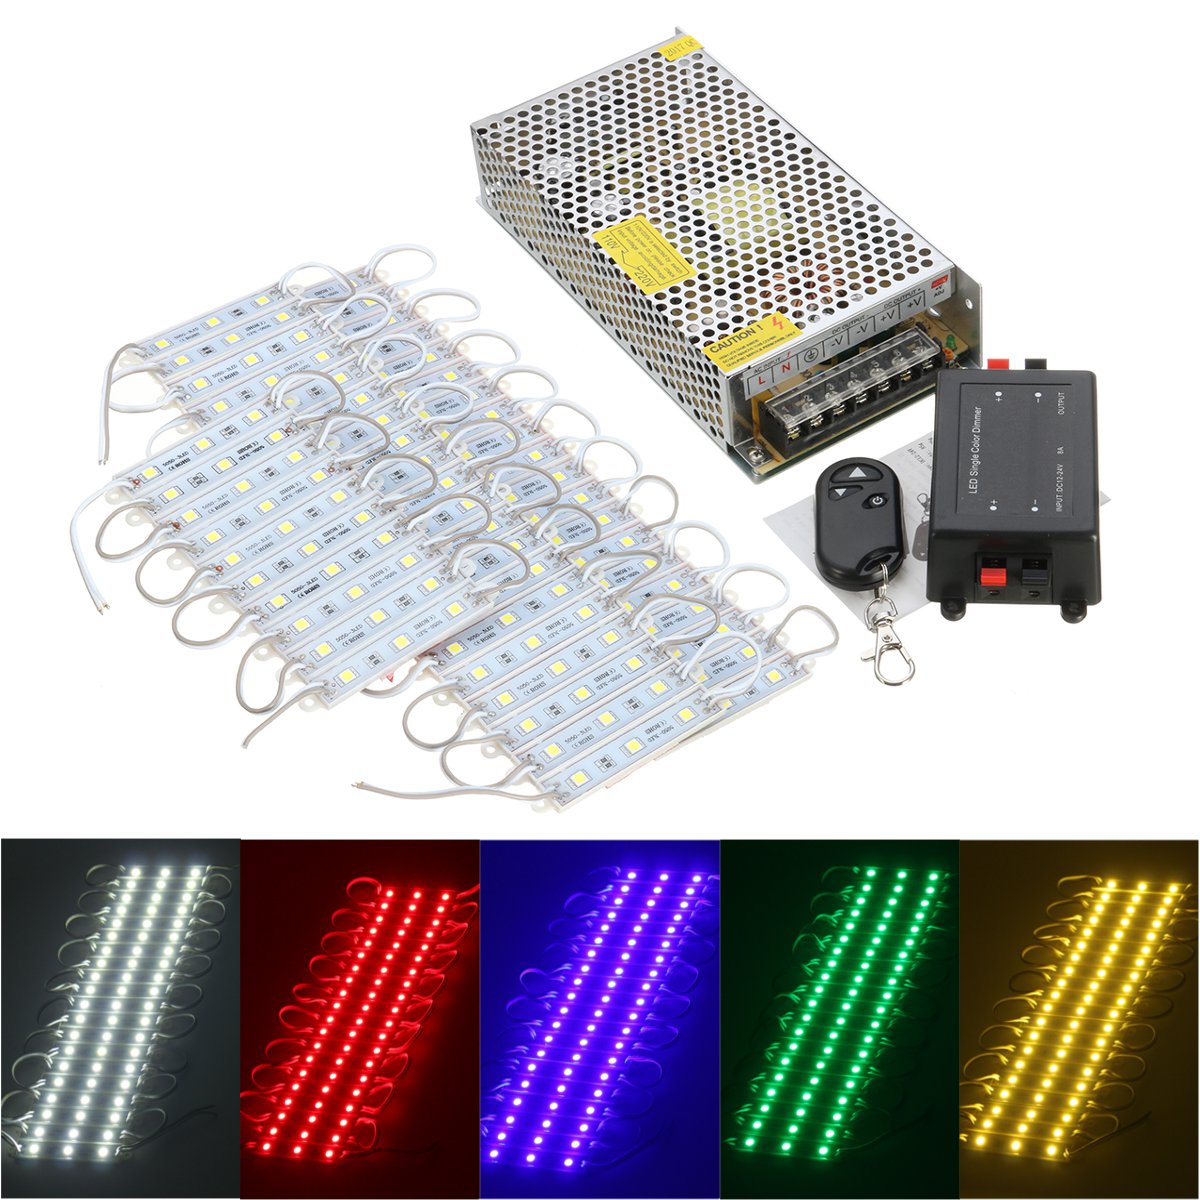 

50PCS 5 Colors SMD5050 LED Module Store Strip Light Front Window Lamp + Power Supply + Remote DC12V